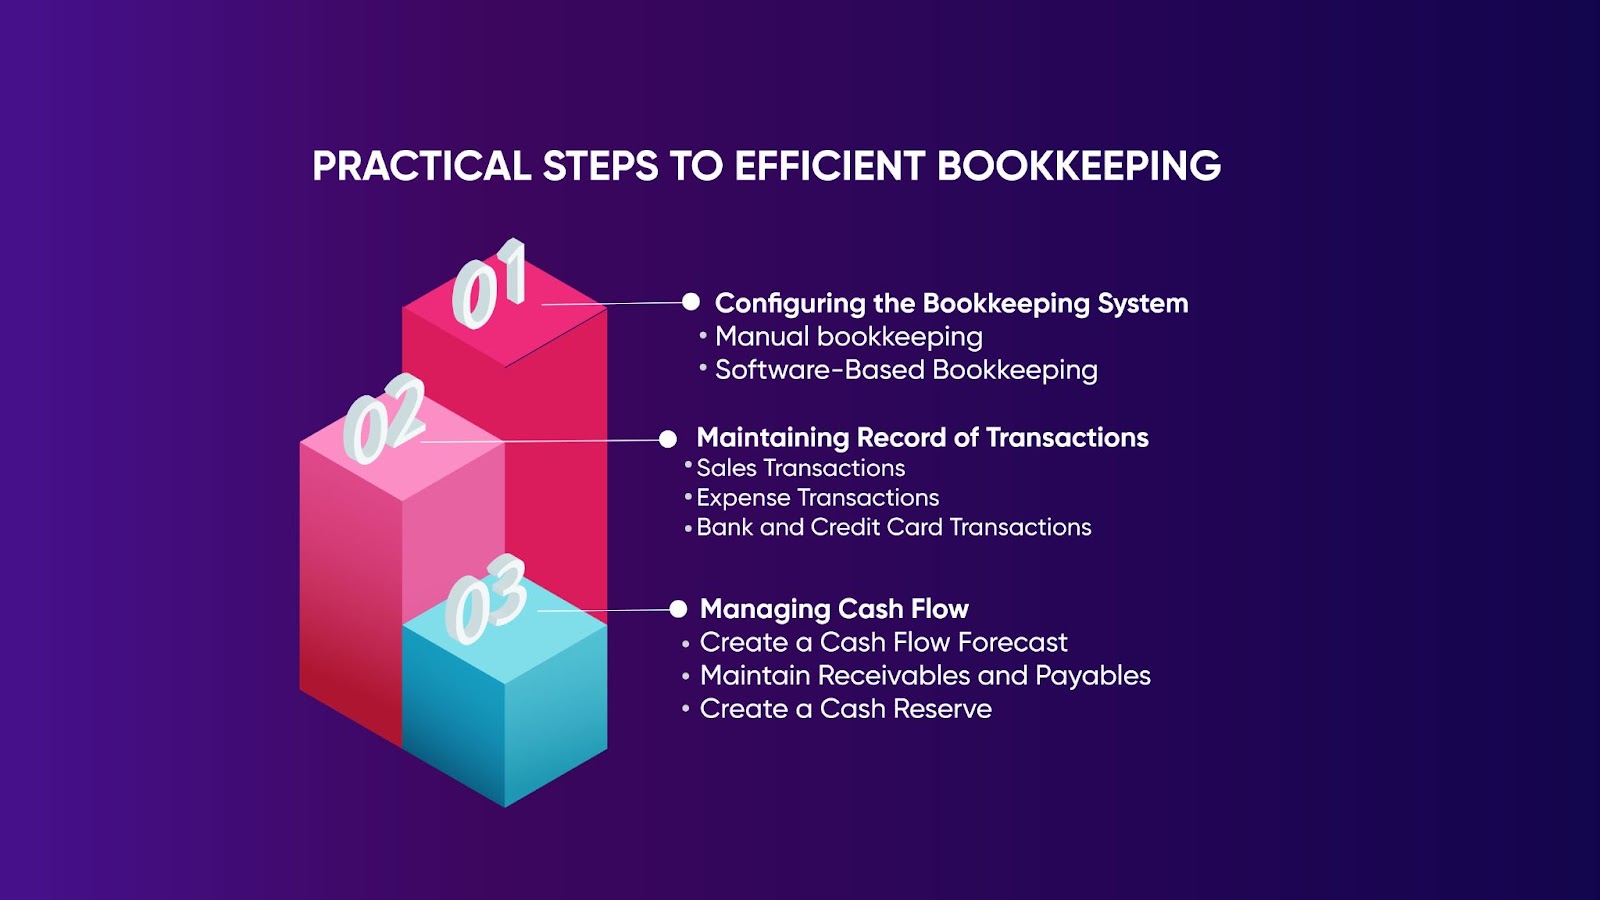 Practical Steps to Efficient Bookkeeping for Small Business